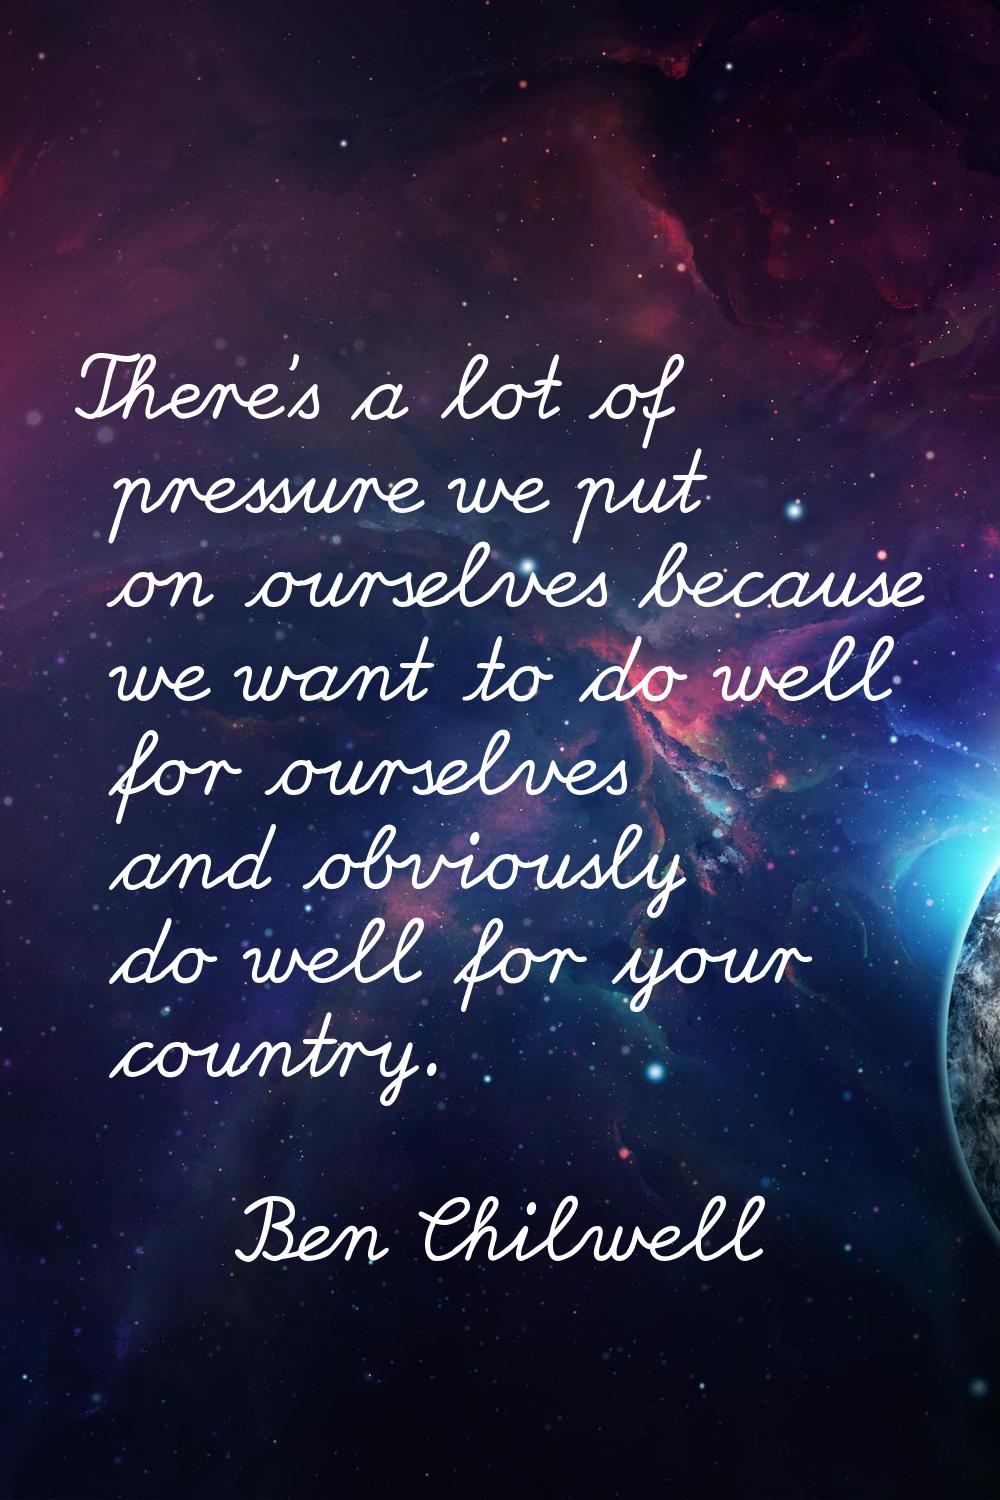 There’s a lot of pressure we put on ourselves because we want to do well for ourselves and obviousl